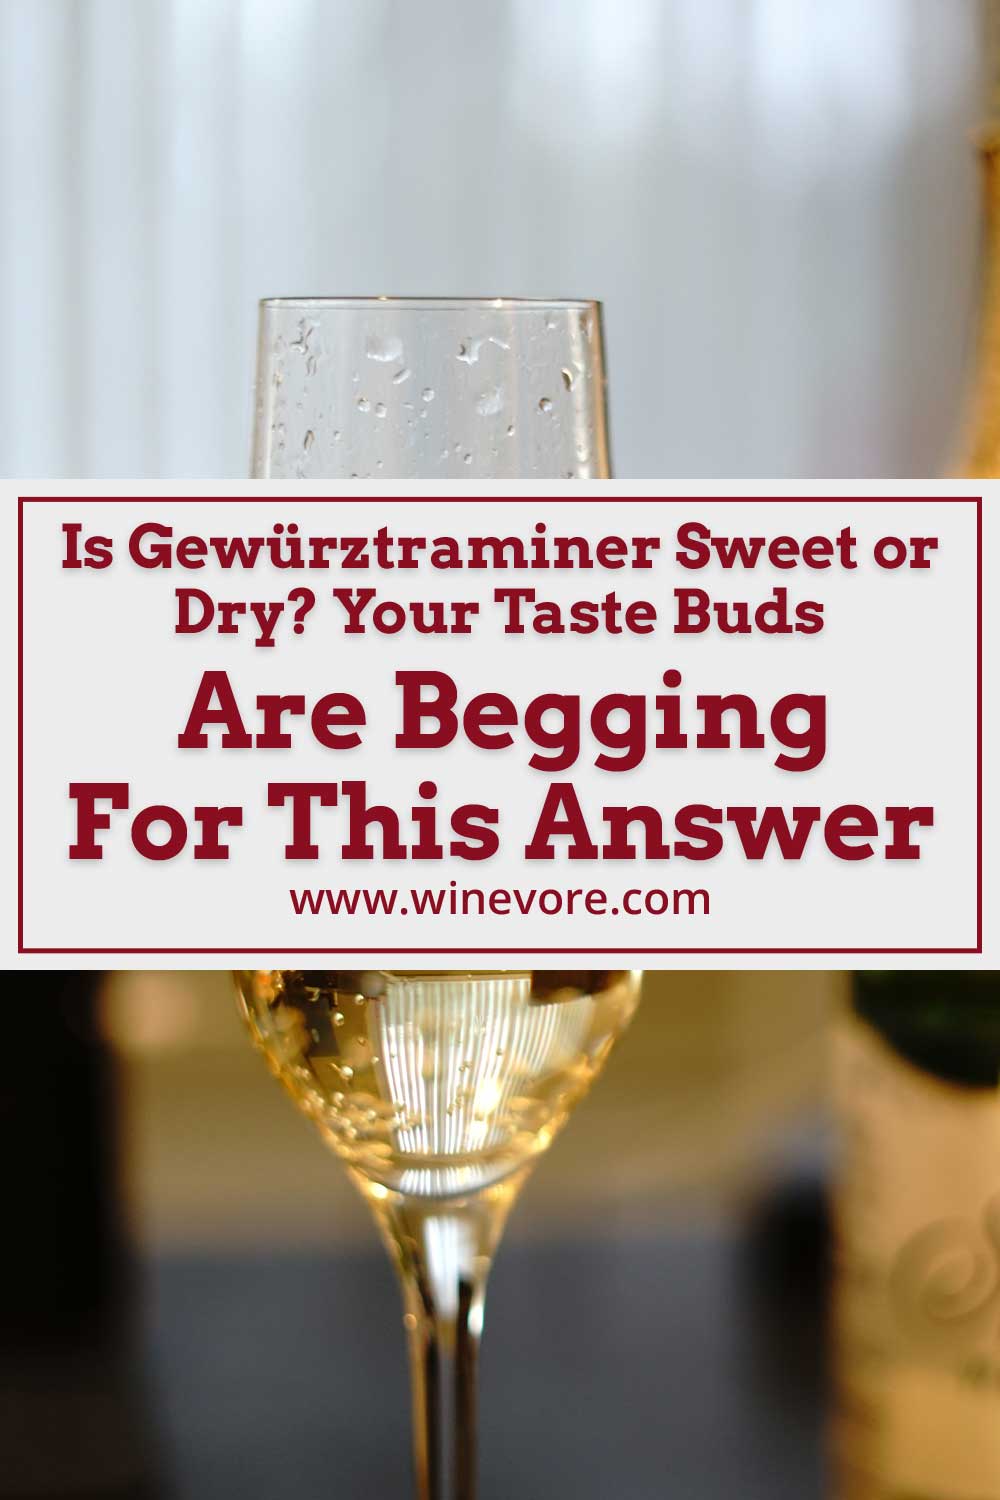 A close up image of a wine glass - Is Gewürztraminer Sweet or Dry?